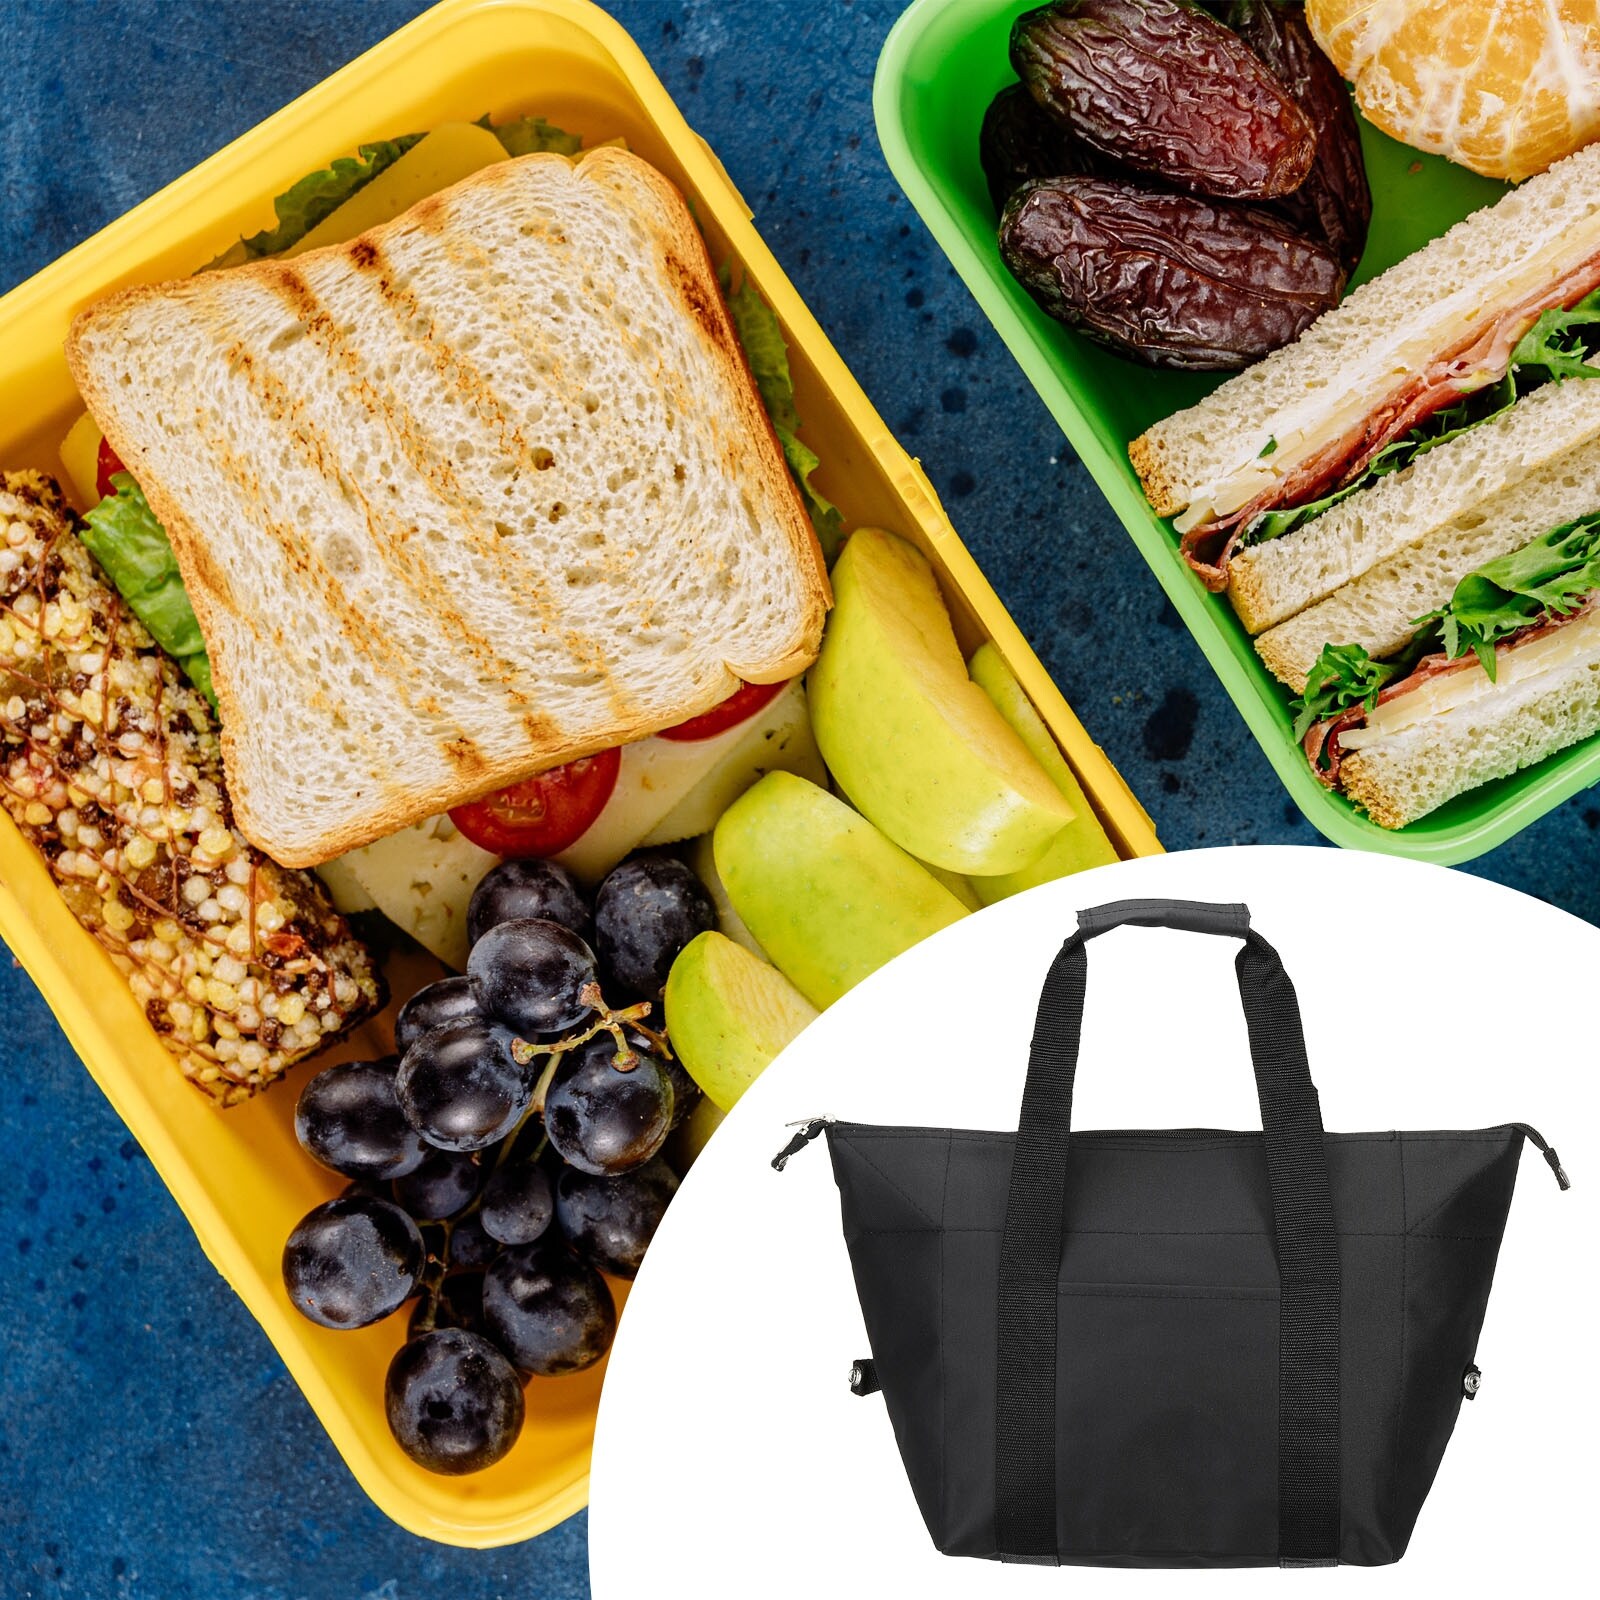 https://ak1.ostkcdn.com/images/products/is/images/direct/83651d85184208284ded664cd57f79b5134c9692/Insulated-Lunch-Bag%2C-Lunch-Tote-Bag-Container%2C-11.42%22x6.69%22x11.81%22.jpg